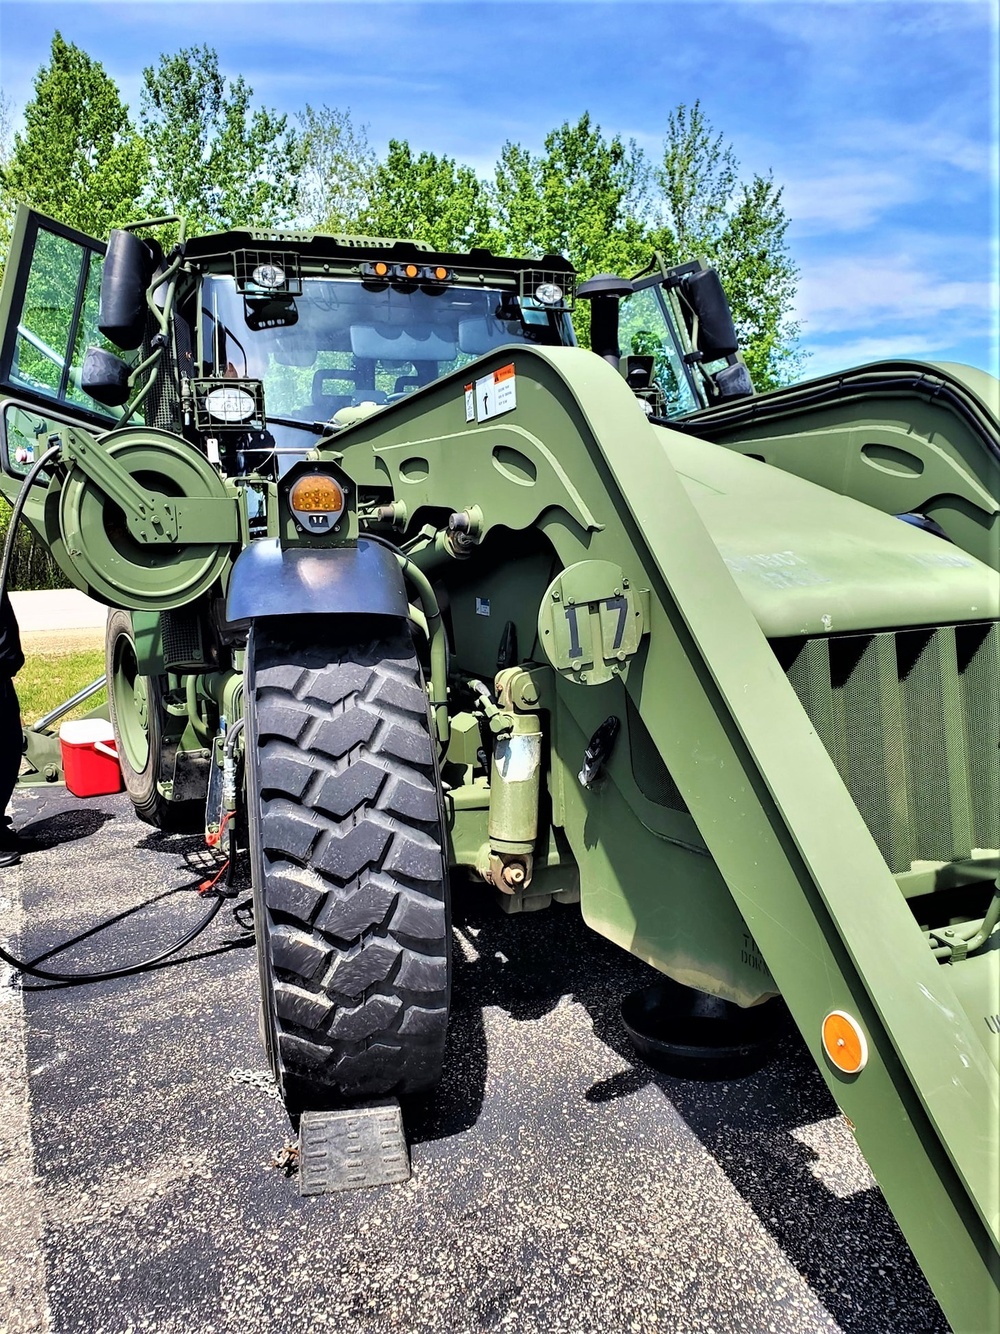 Fort McCoy’s 2022 Armed Forces Day Open House draws thousands of people